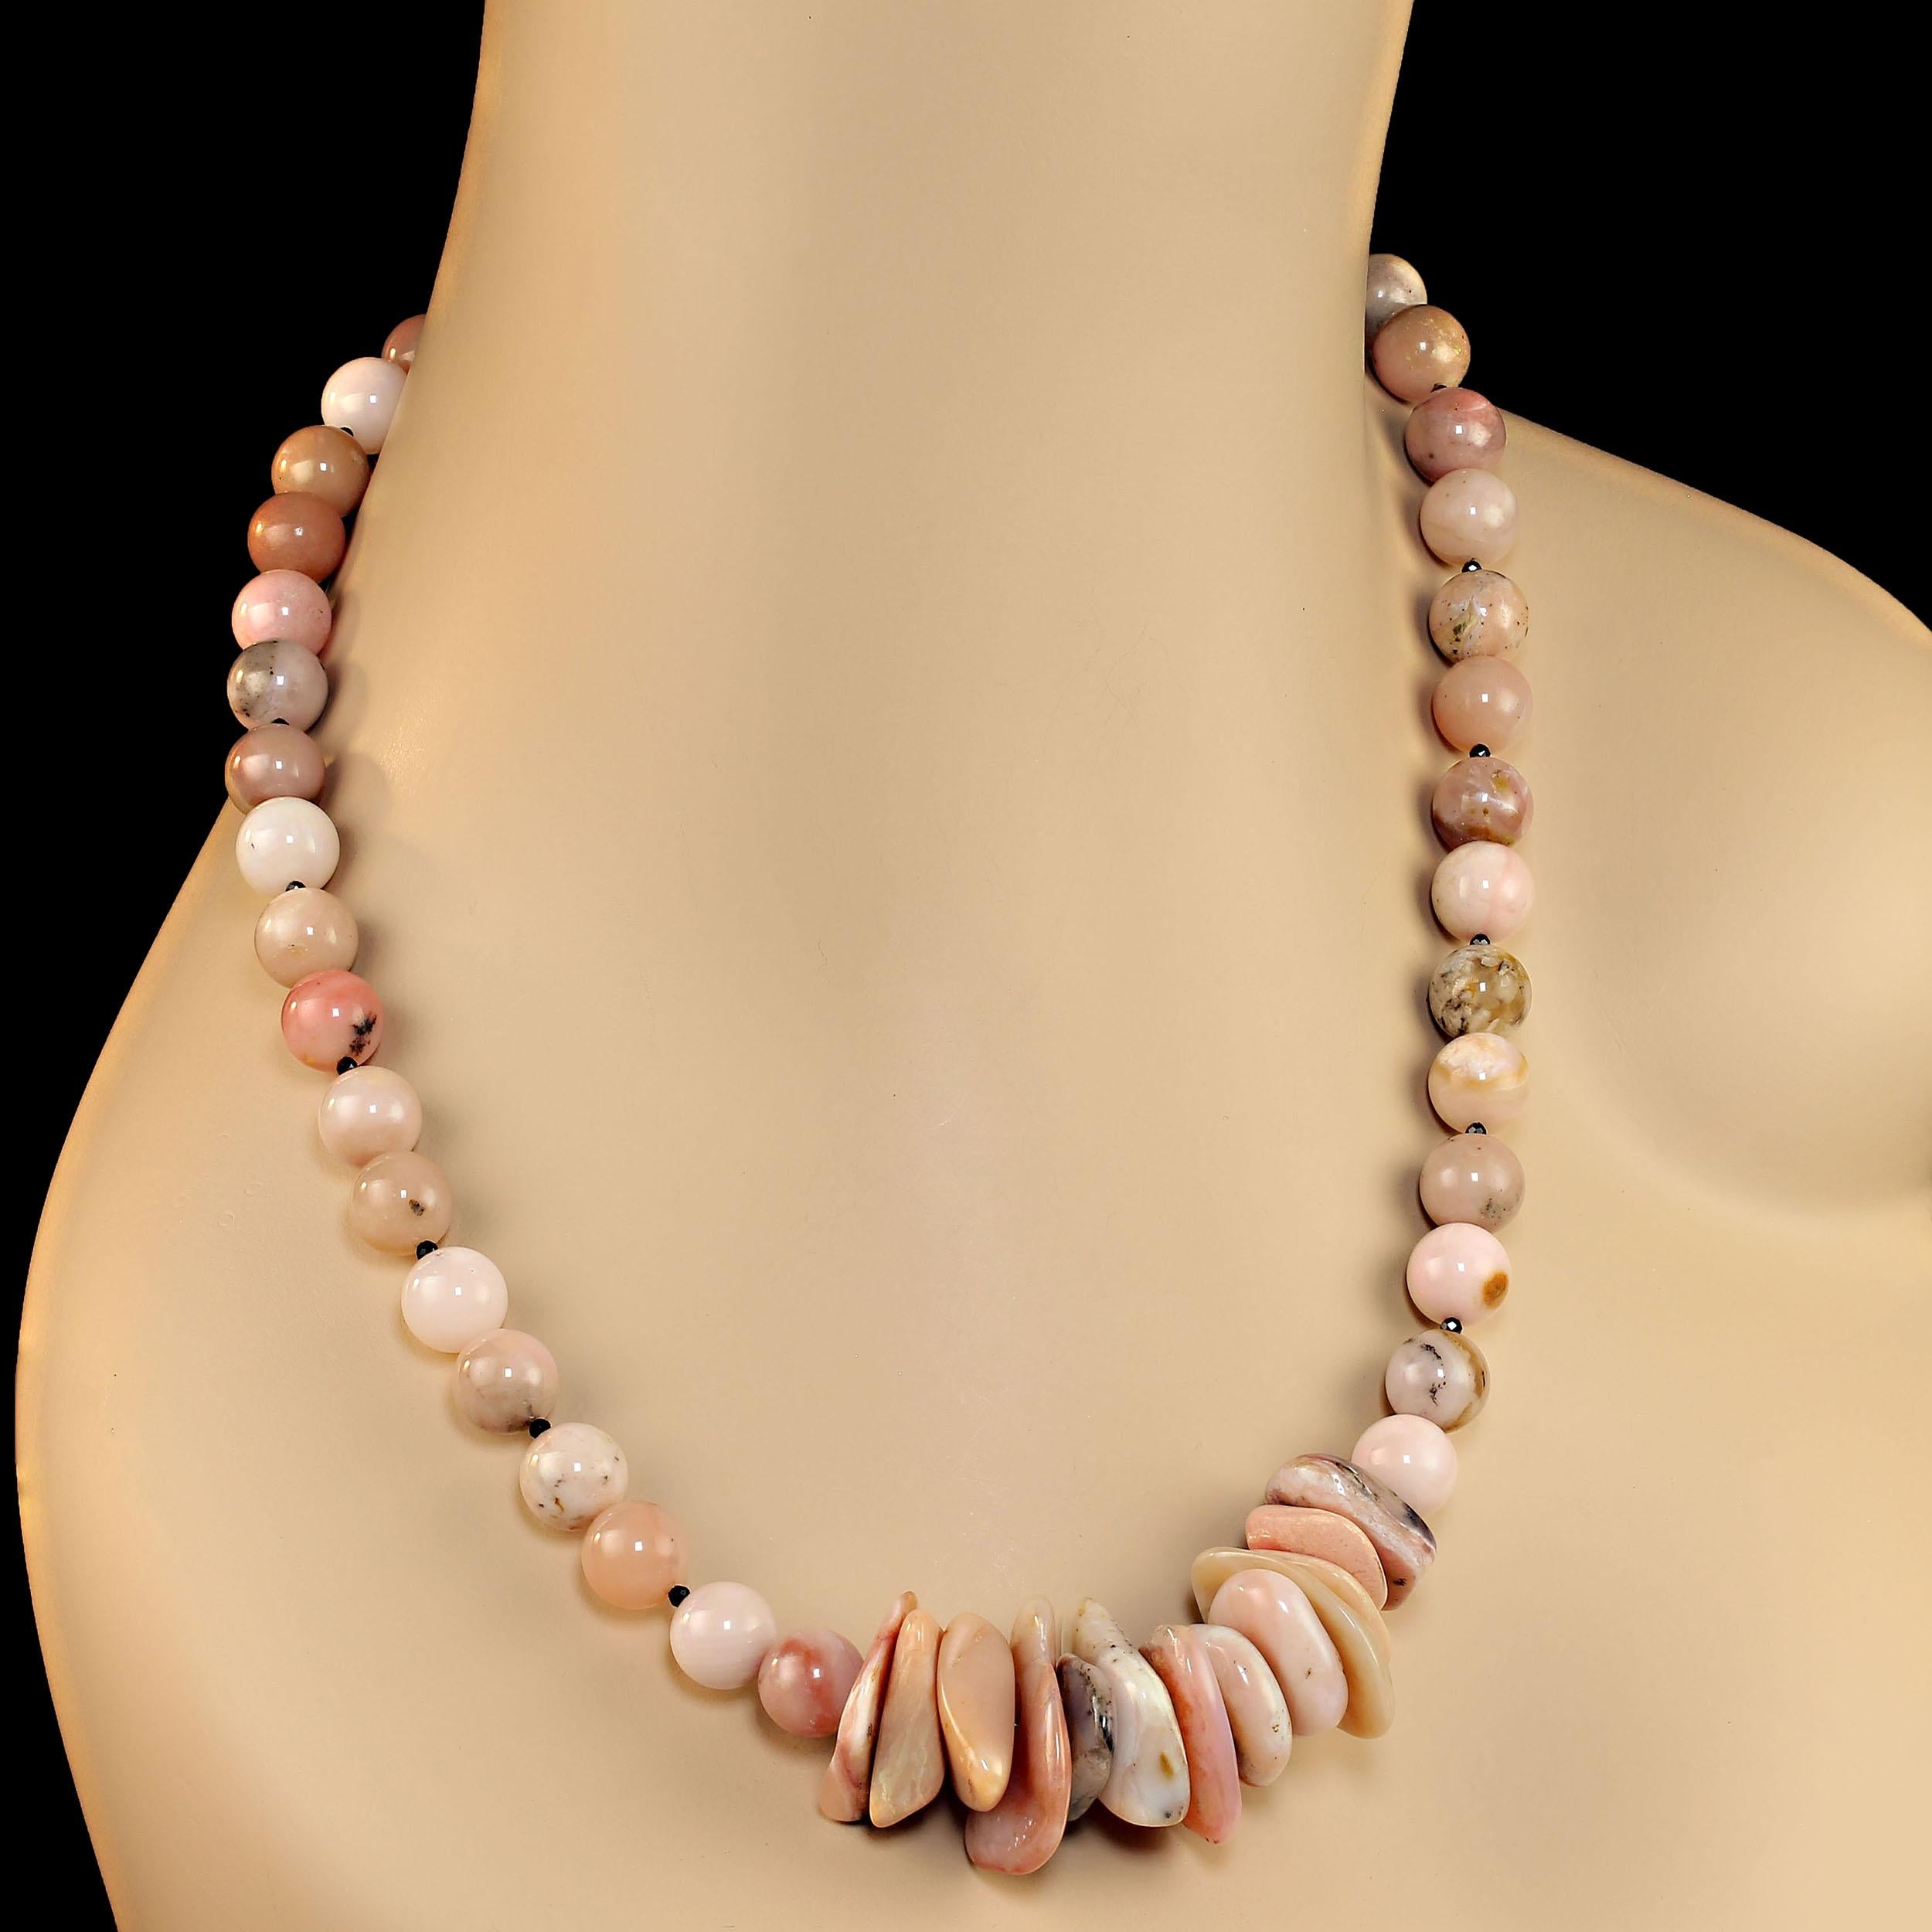 Artisan AJD 20 Inch Unique Pink Peruvian Opal Necklace For Sale